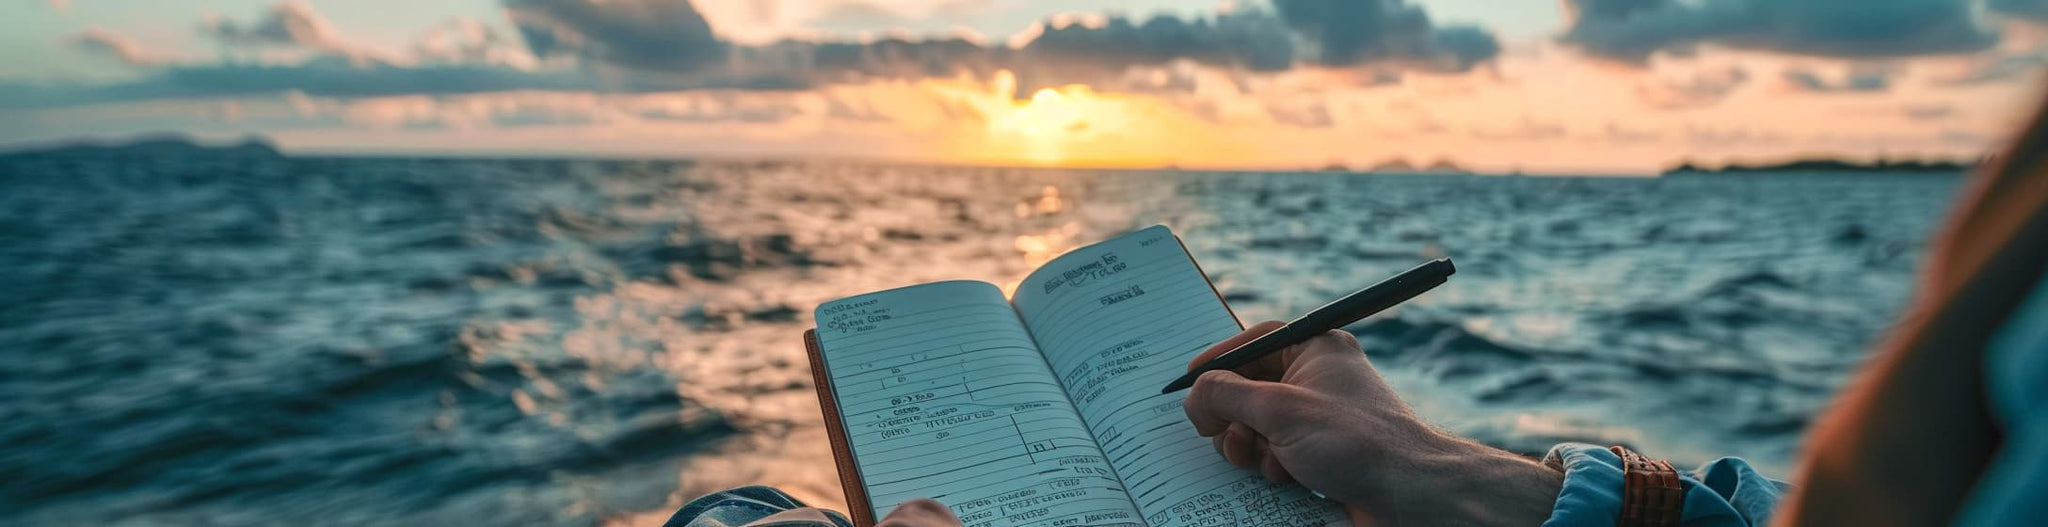 Person writing in a notebook against the backdrop of a sunset over the ocean